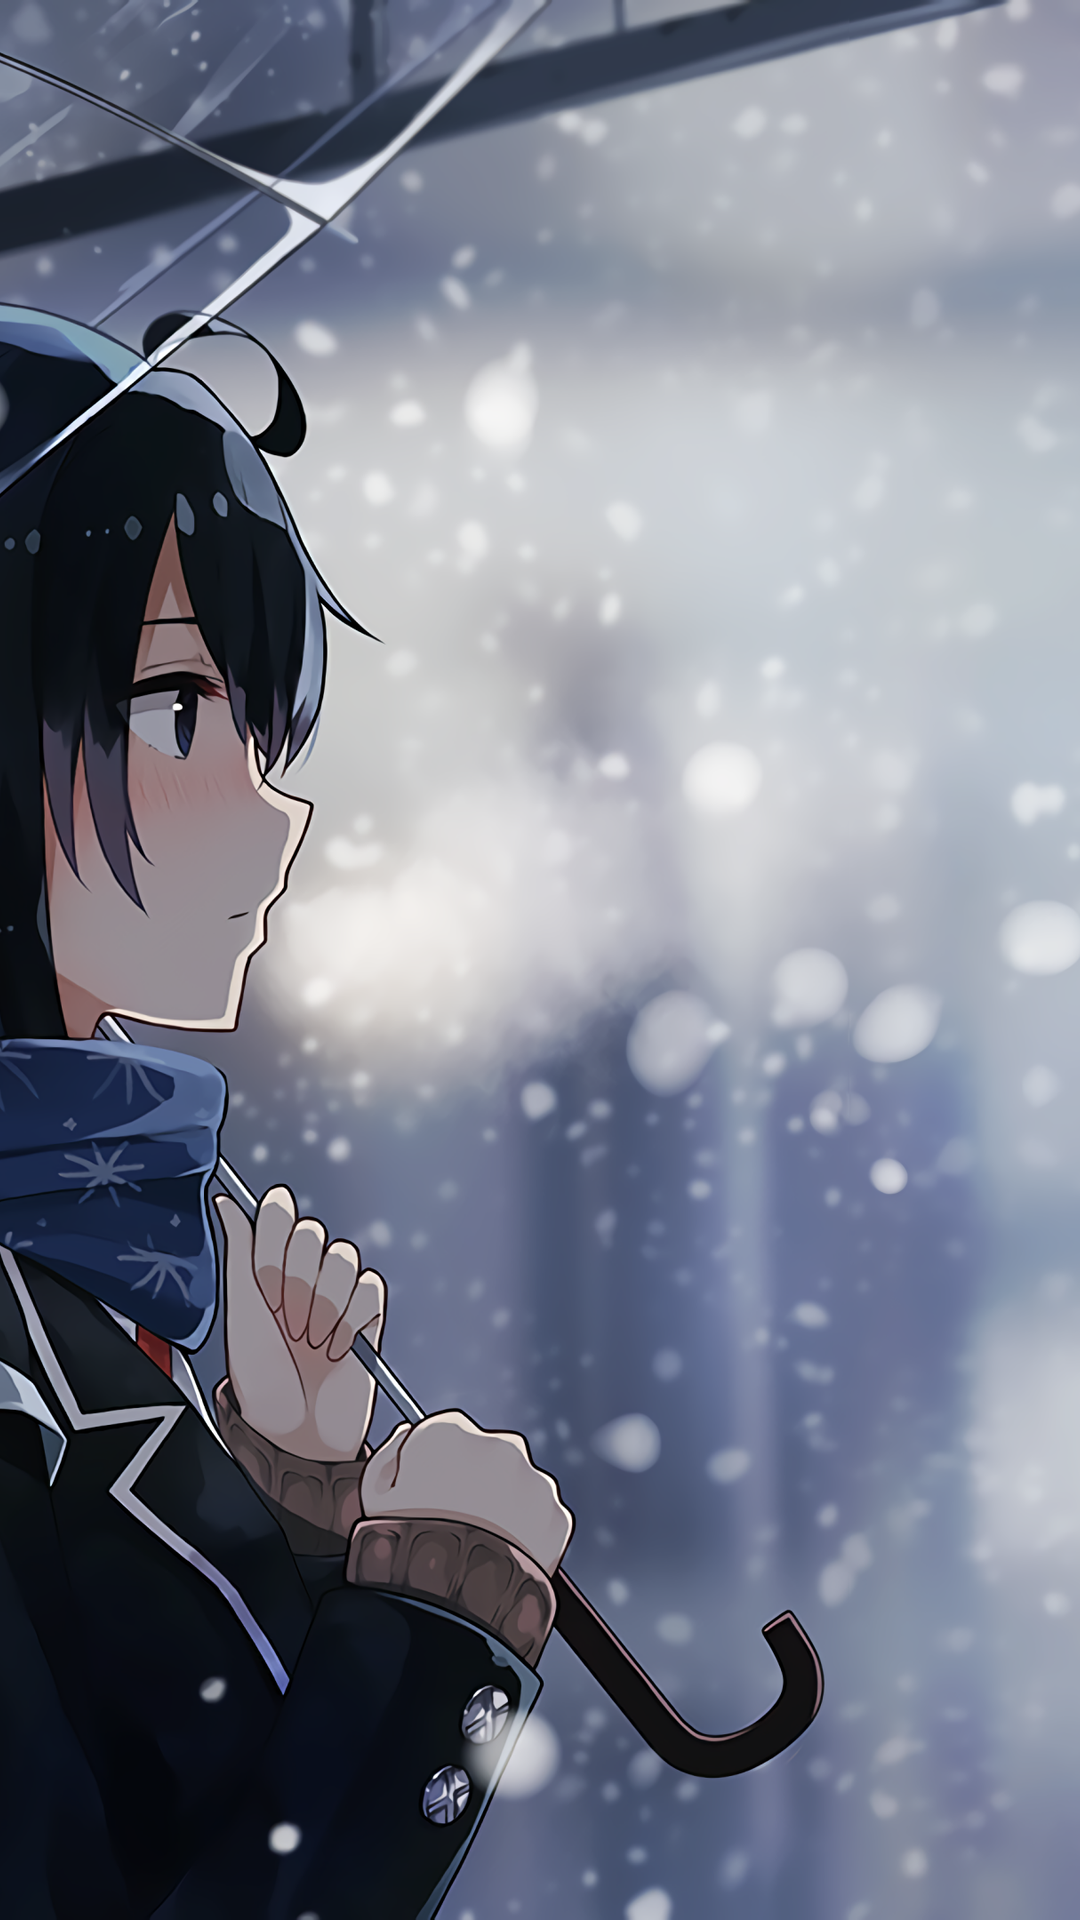 10+ Anime Snow Wallpapers for iPhone and Android by Ralph Parks